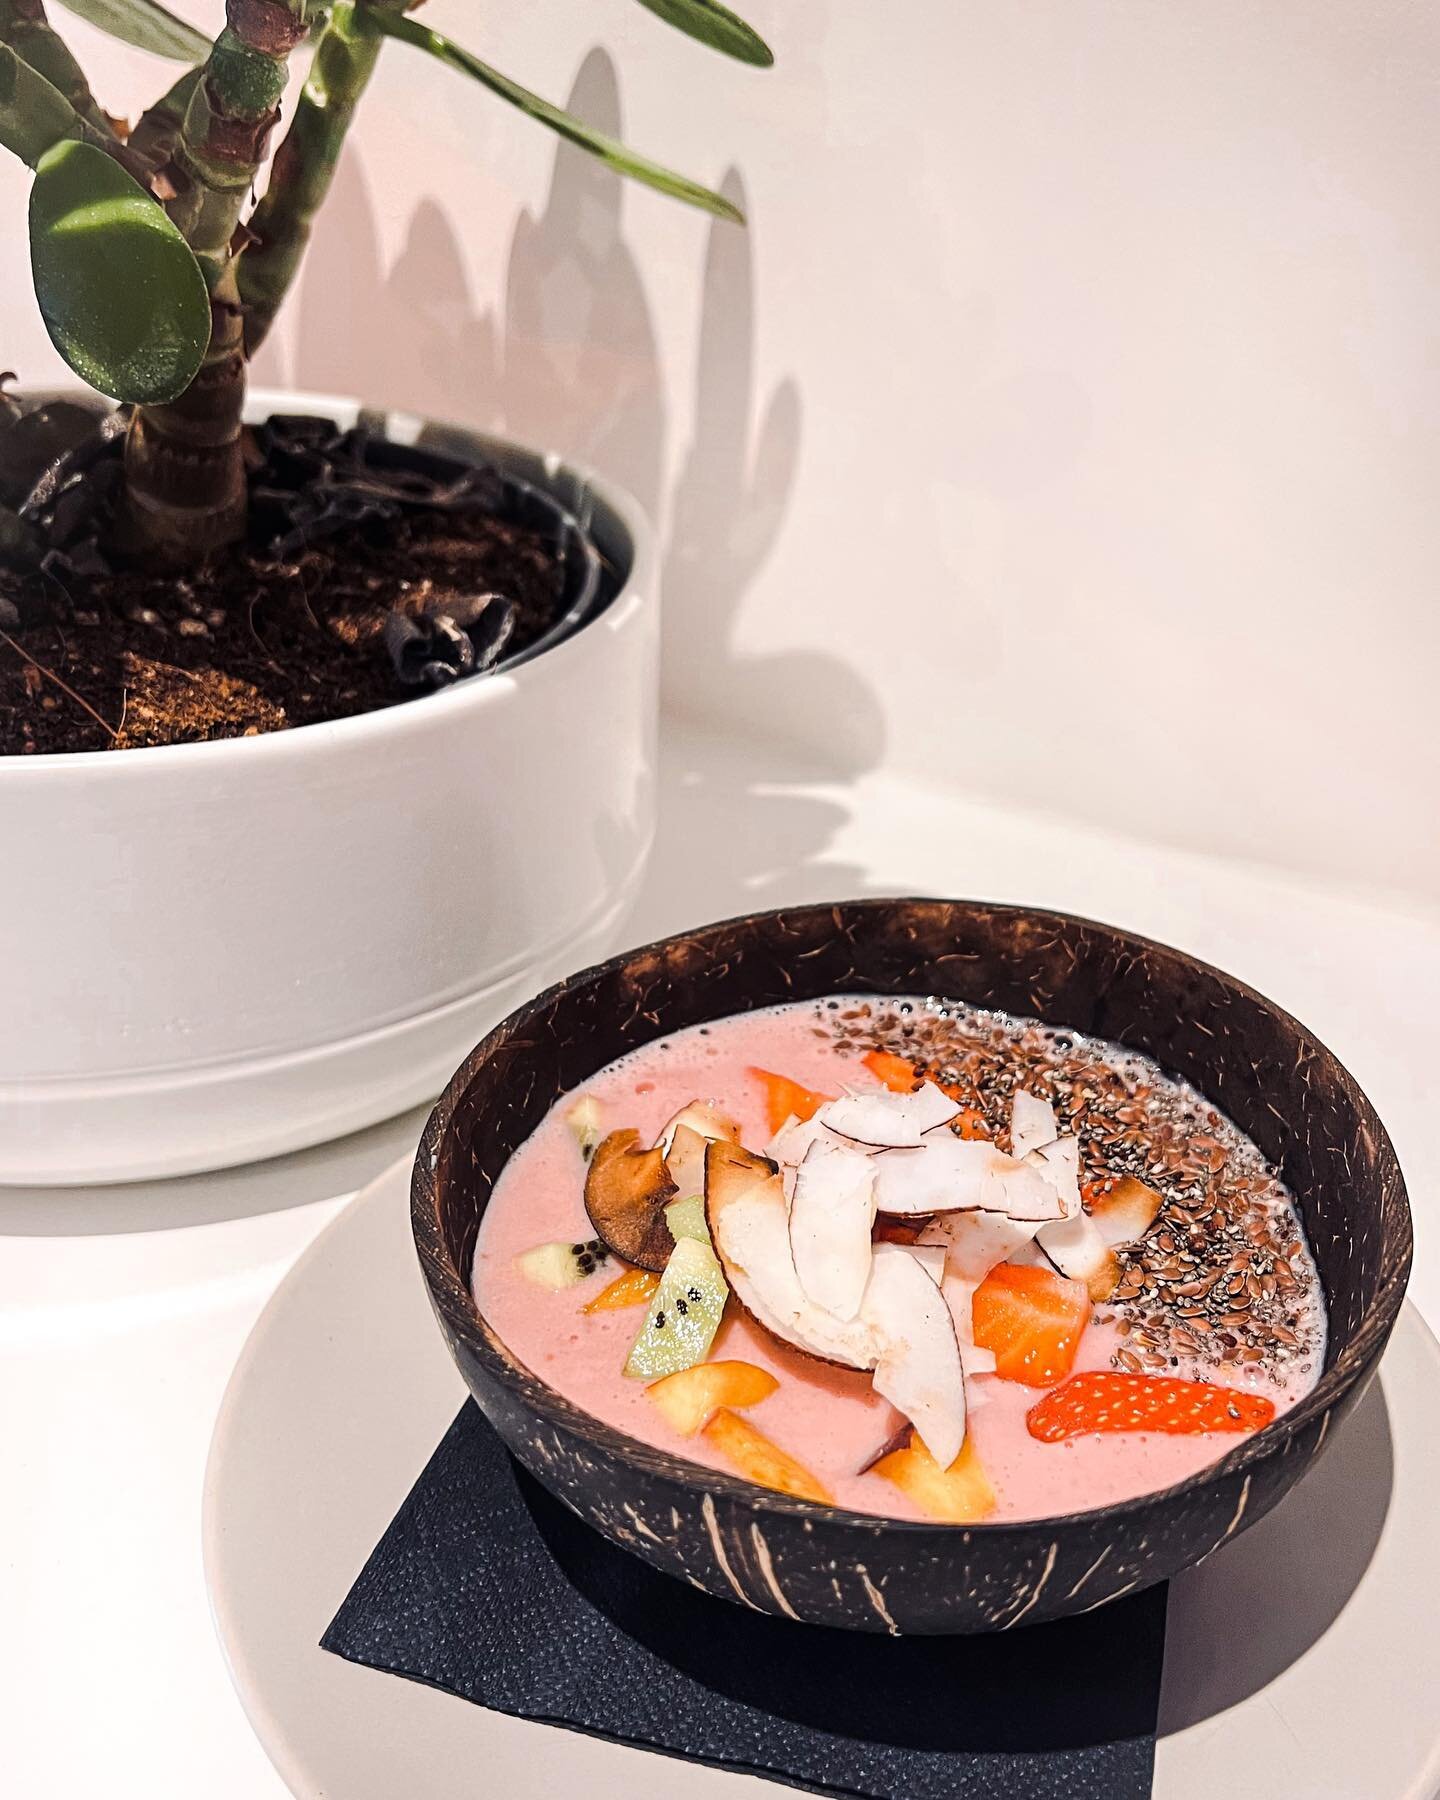 The Smoothie Bowl, yep we wanna dive in too 🥥 🍓 

This baby is on our All Day Brunch Menu 🥄 

#thetruffledhog #stokesley #427